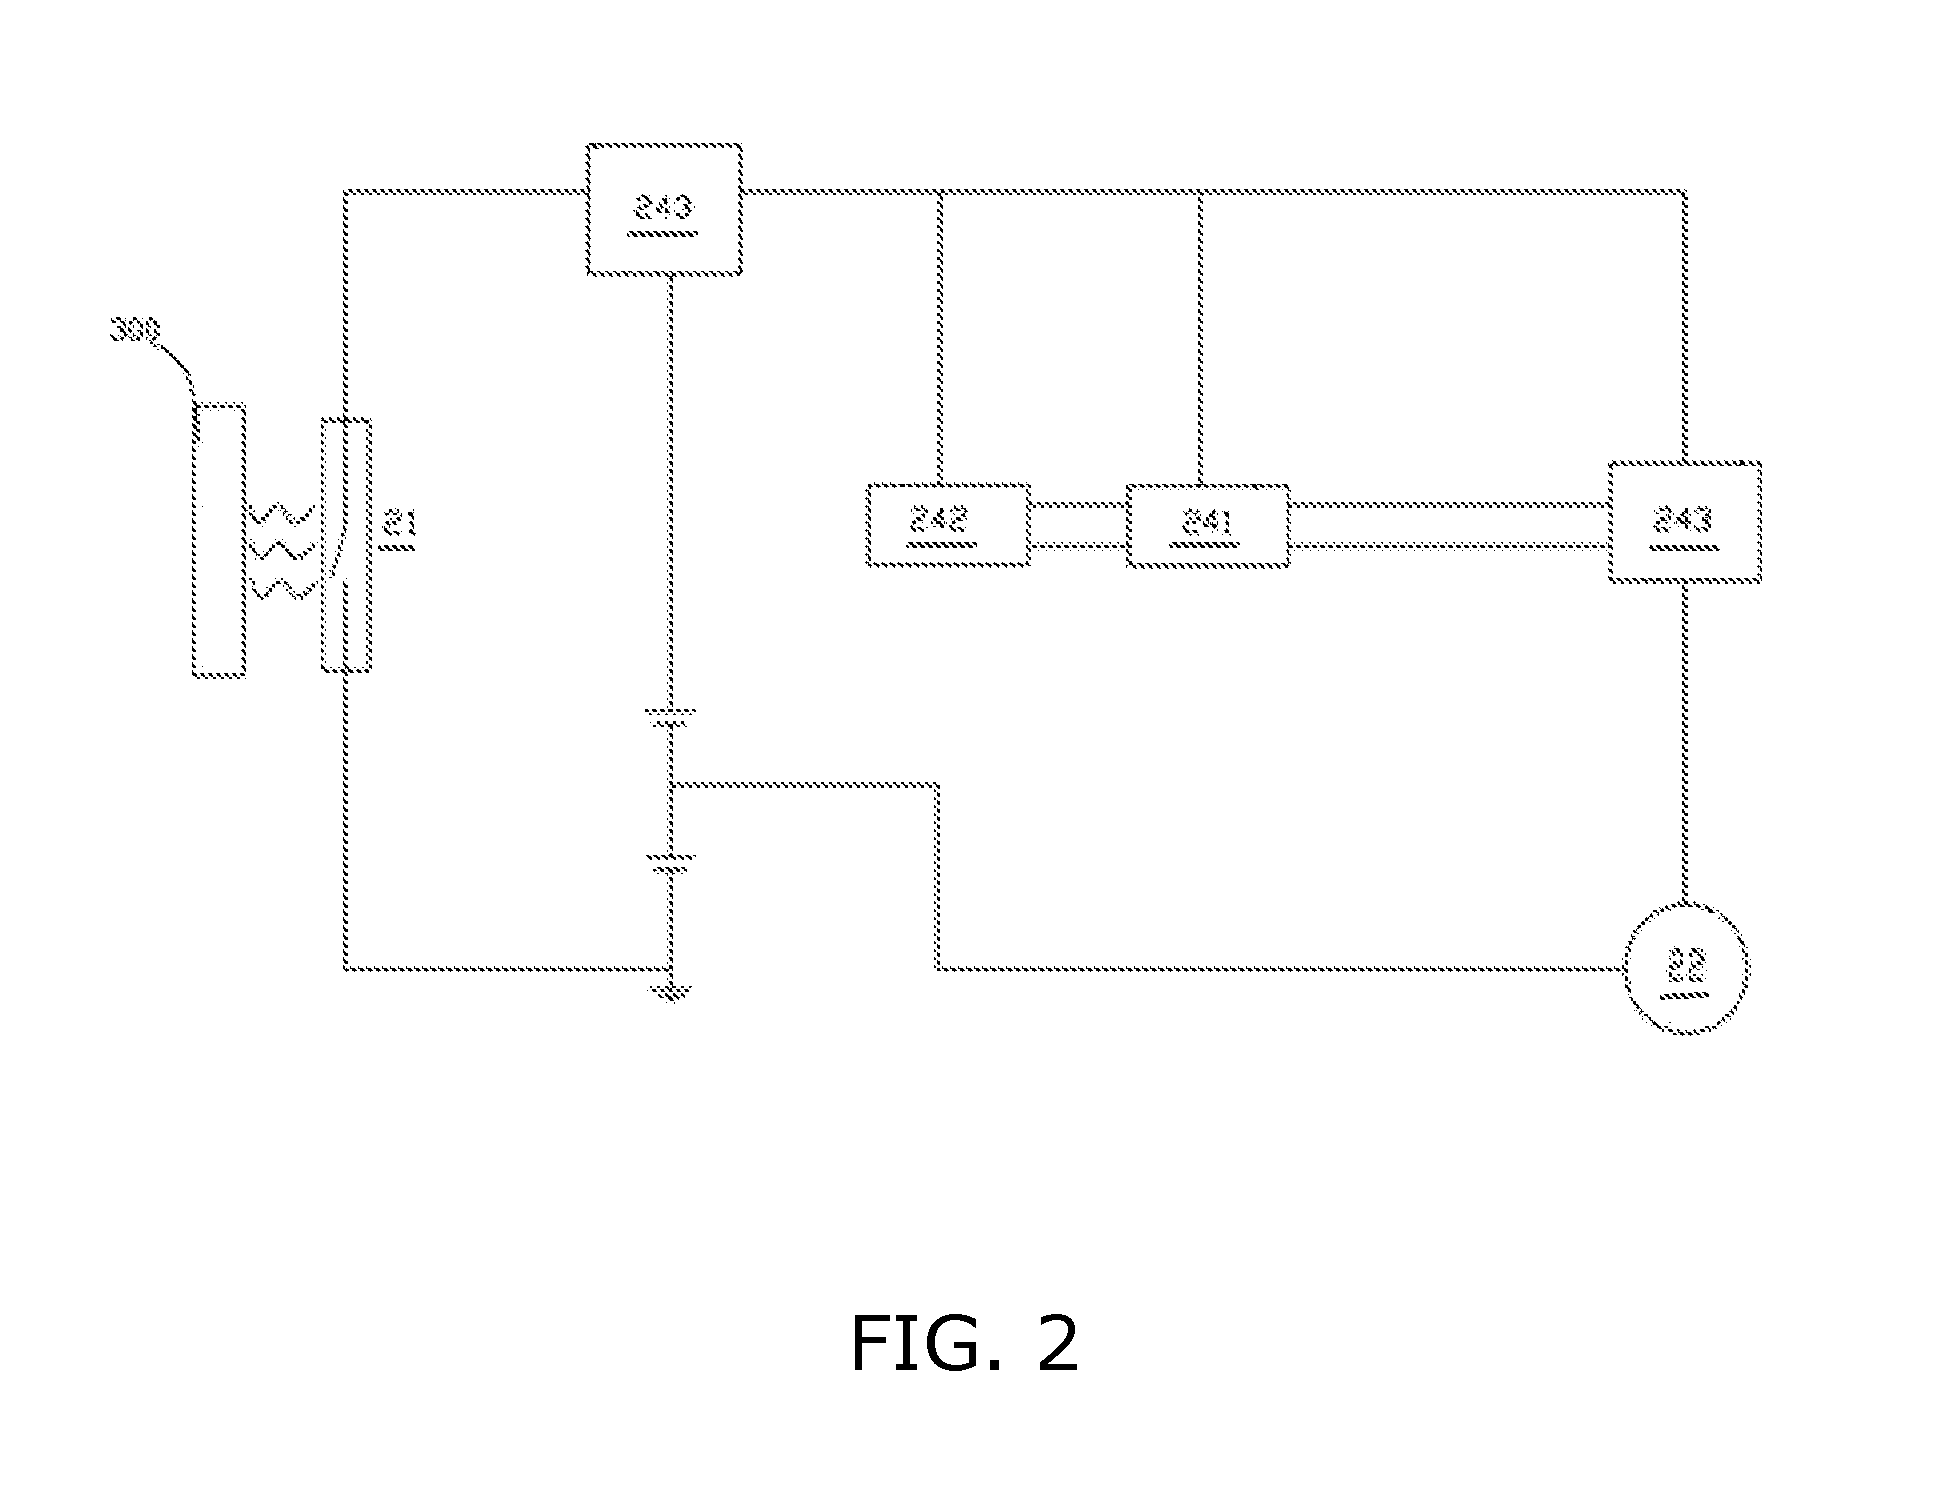 Physiotherapy device and method for controlling the physiotherapy device